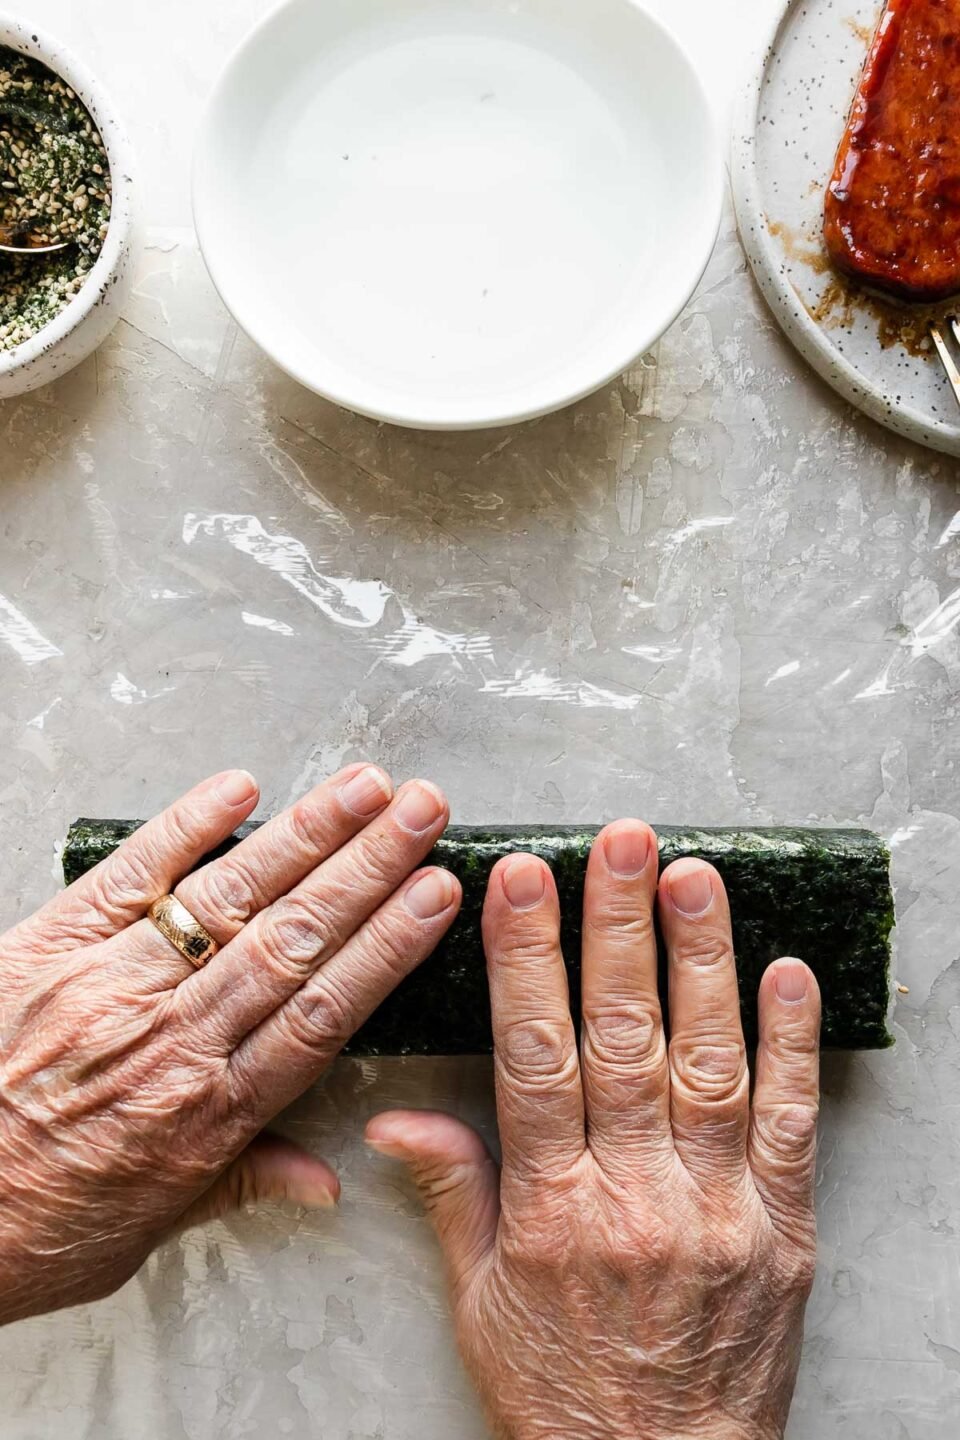 A close up of a woman's hands working to roll a partially wrapped musubi away from herself until it is sealed shut. Positioned just above the almost finished musubi is a small bowl filled with furikake seasoning with a spoon resting inside, another small white bowl filled with water, and a small speckled ceramic plate with pan-fried teriyaki Spam.